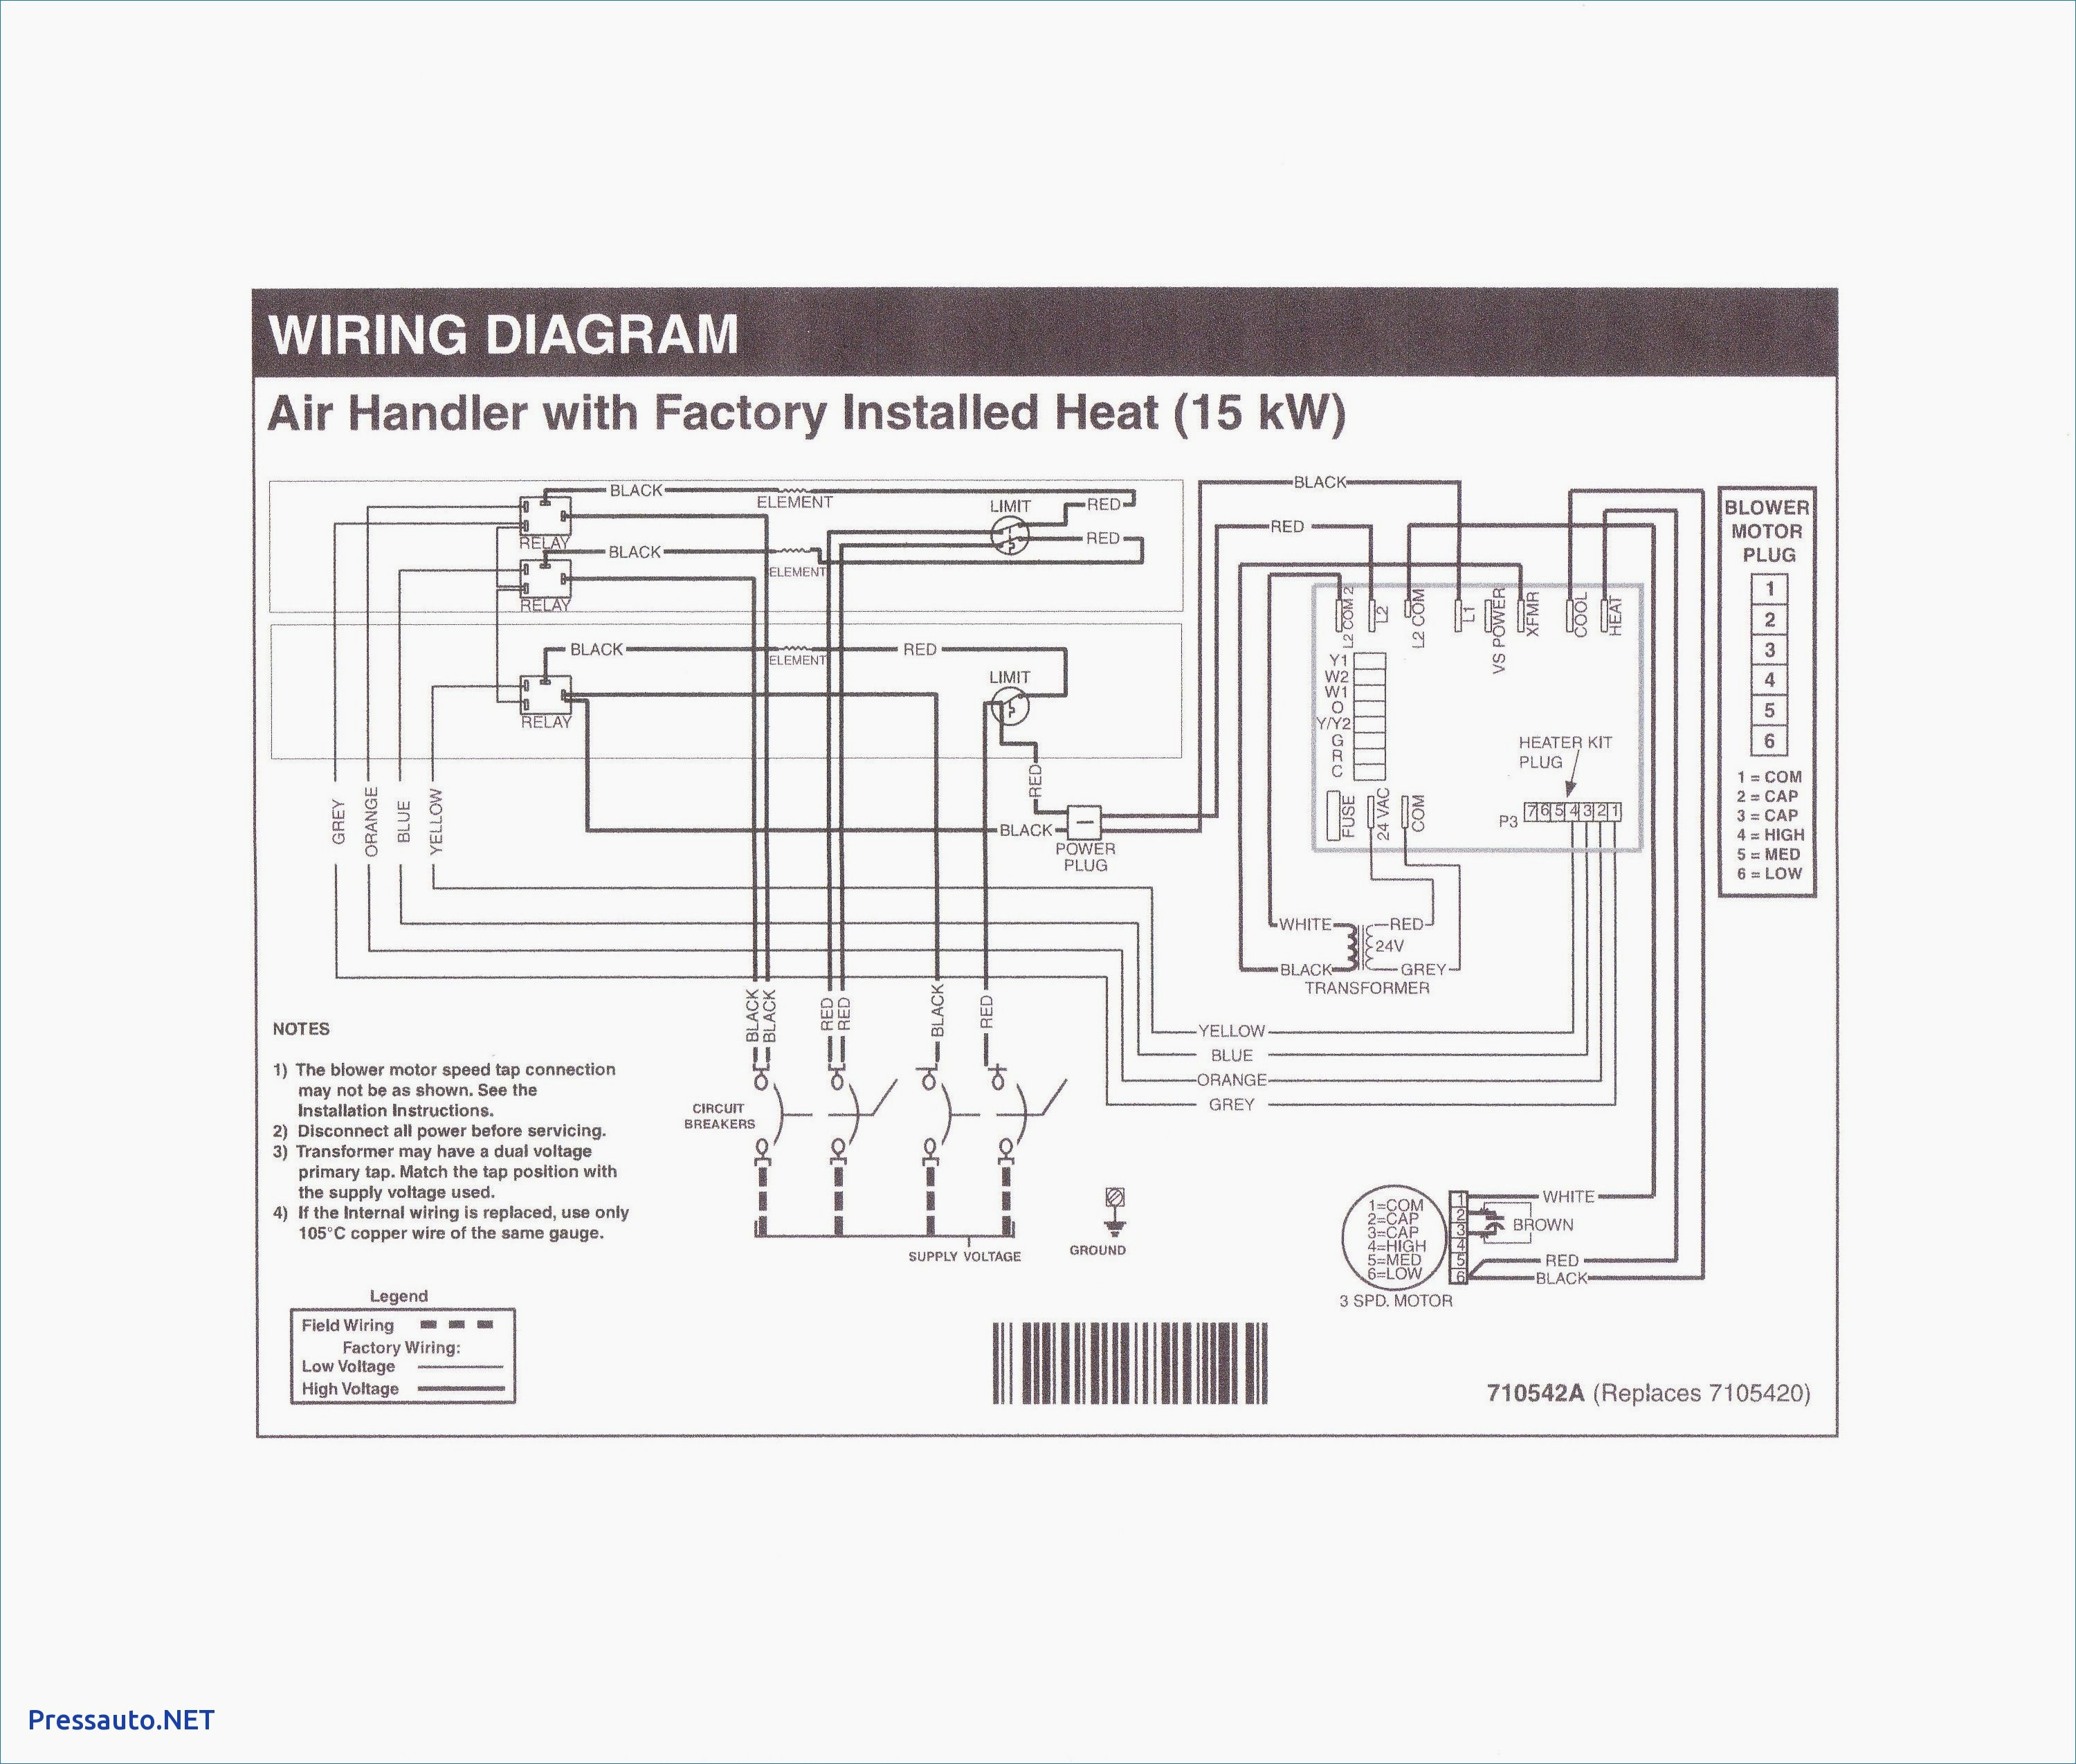 Furnace Wiring Diagram For Blower Motor from annawiringdiagram.com